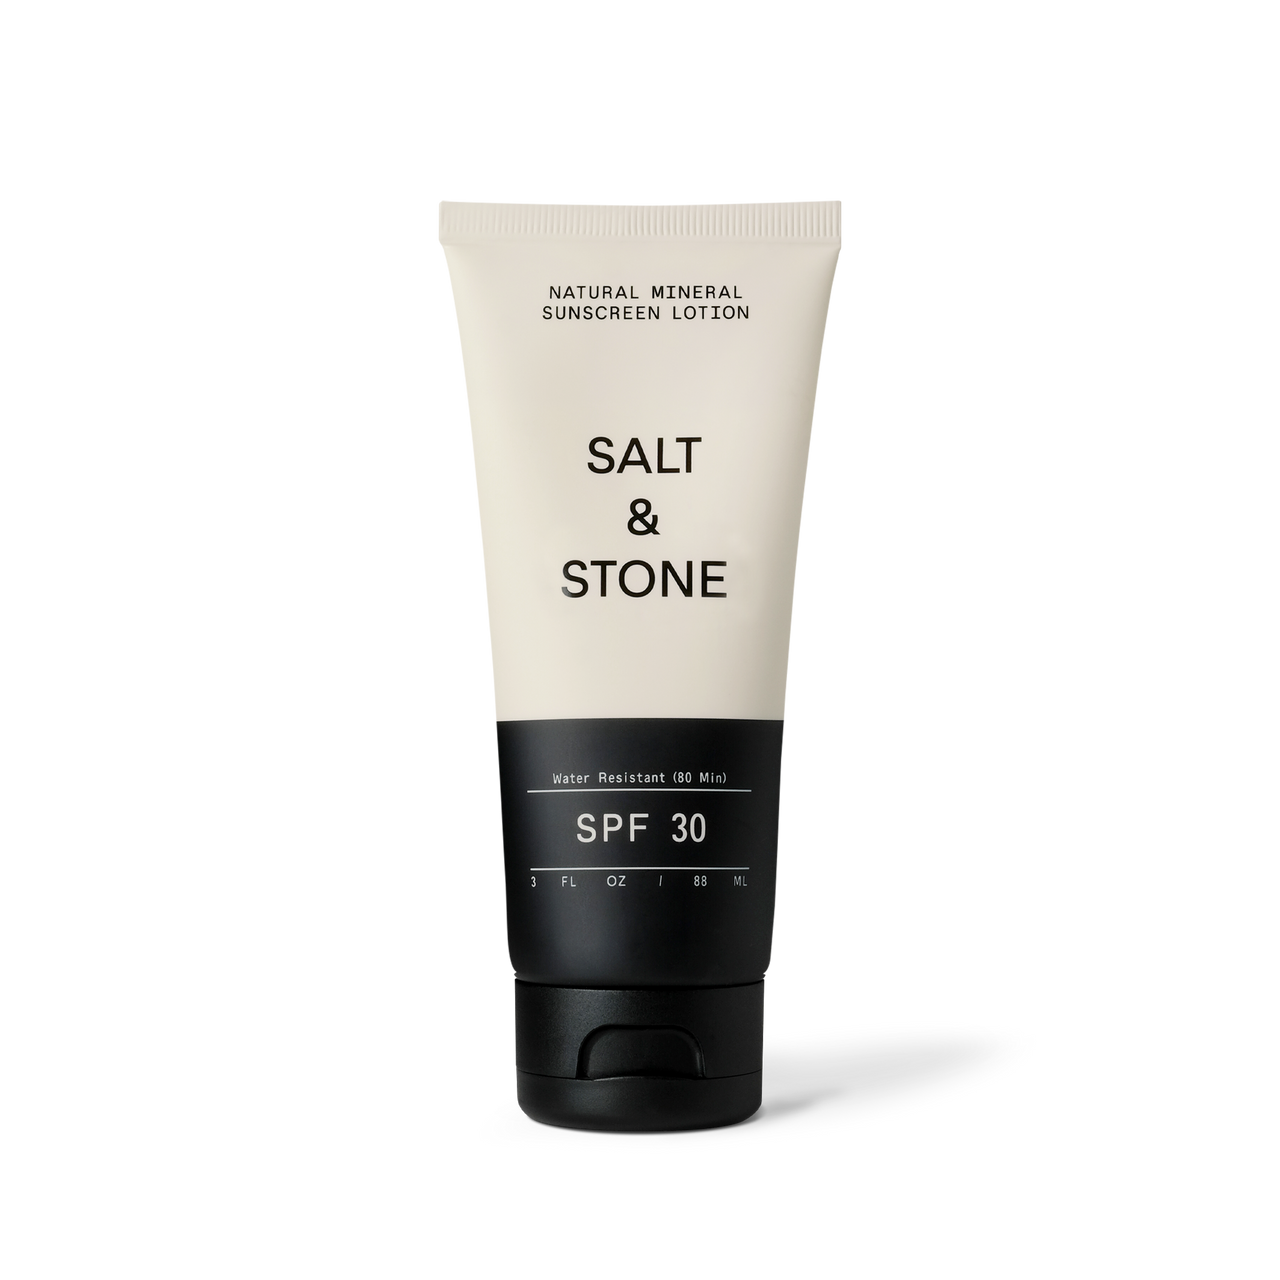 SALT AND STONE NATURAL MINERAL SUNSCREEN - SPF 30